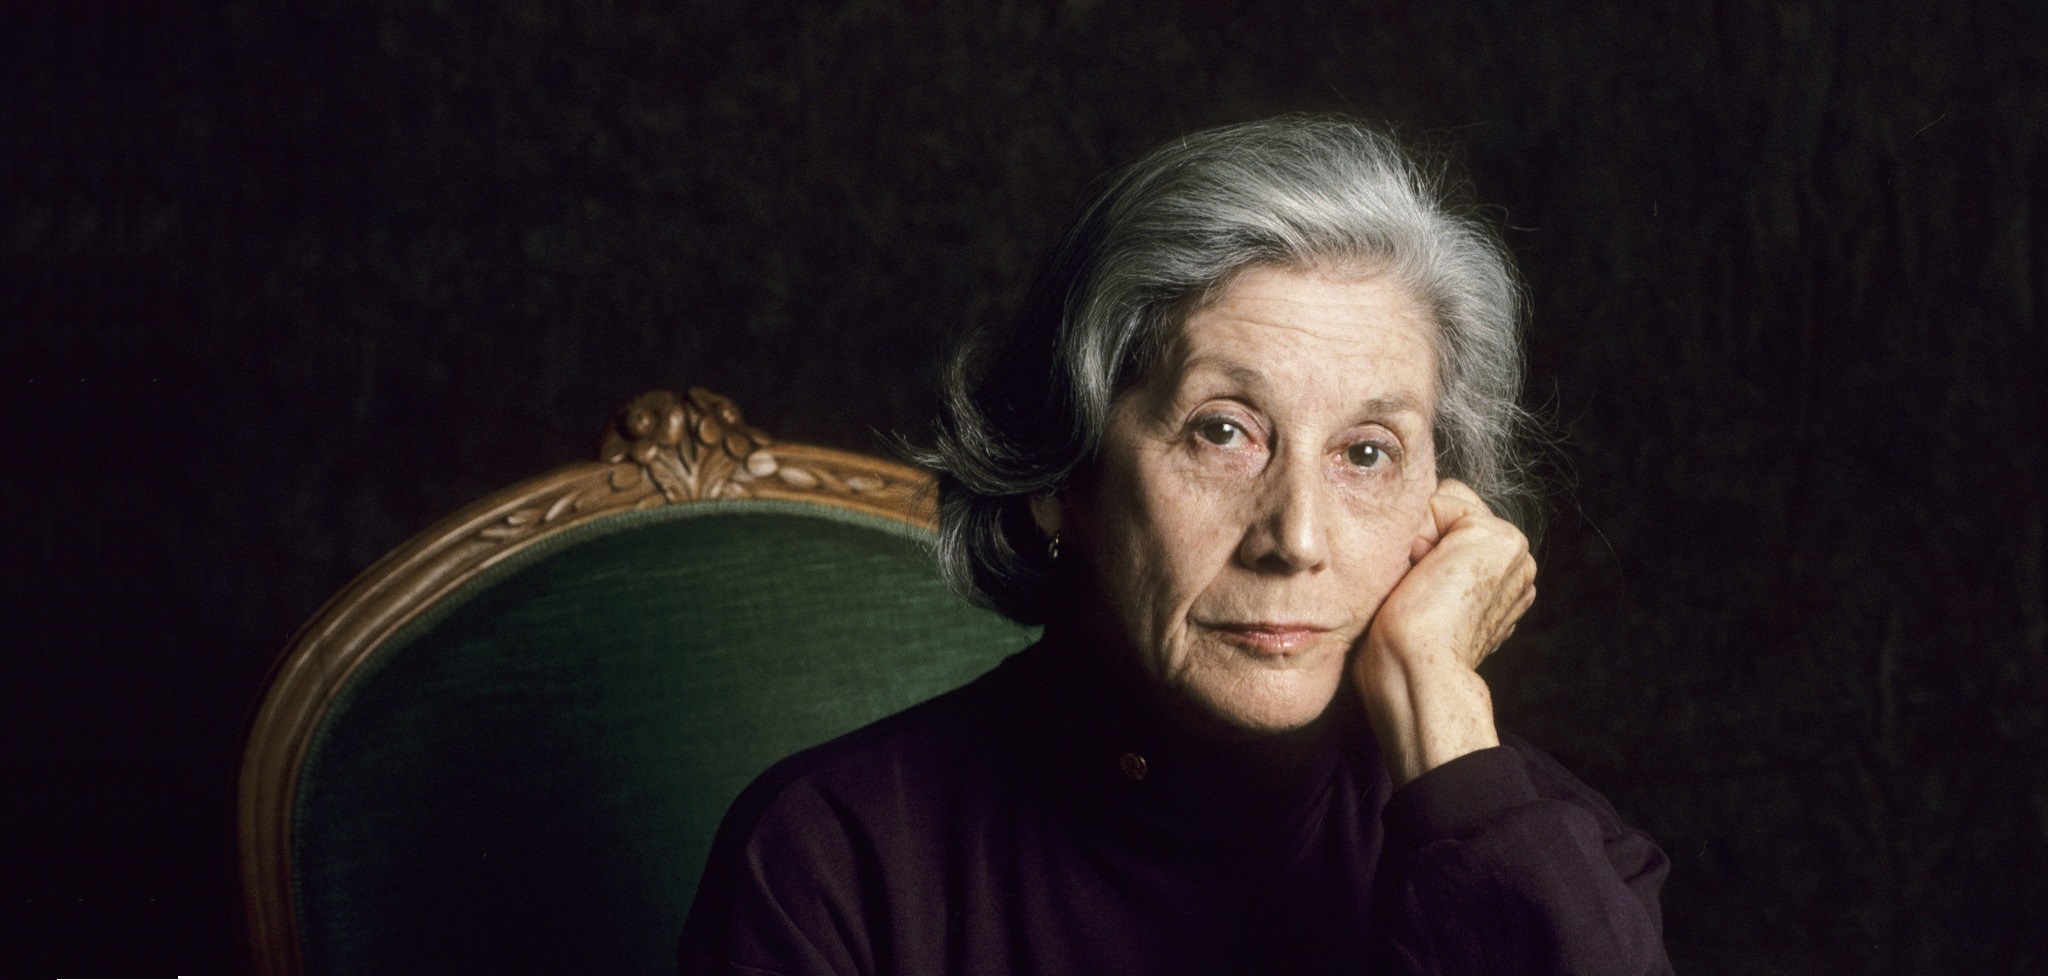 PARIS;FRANCE - JANUARY 25: South African author Nadine Gordimer poses while in Paris,France to promote her book on the 25th of January 1993. (Photo by Ulf Andersen/Getty Images)